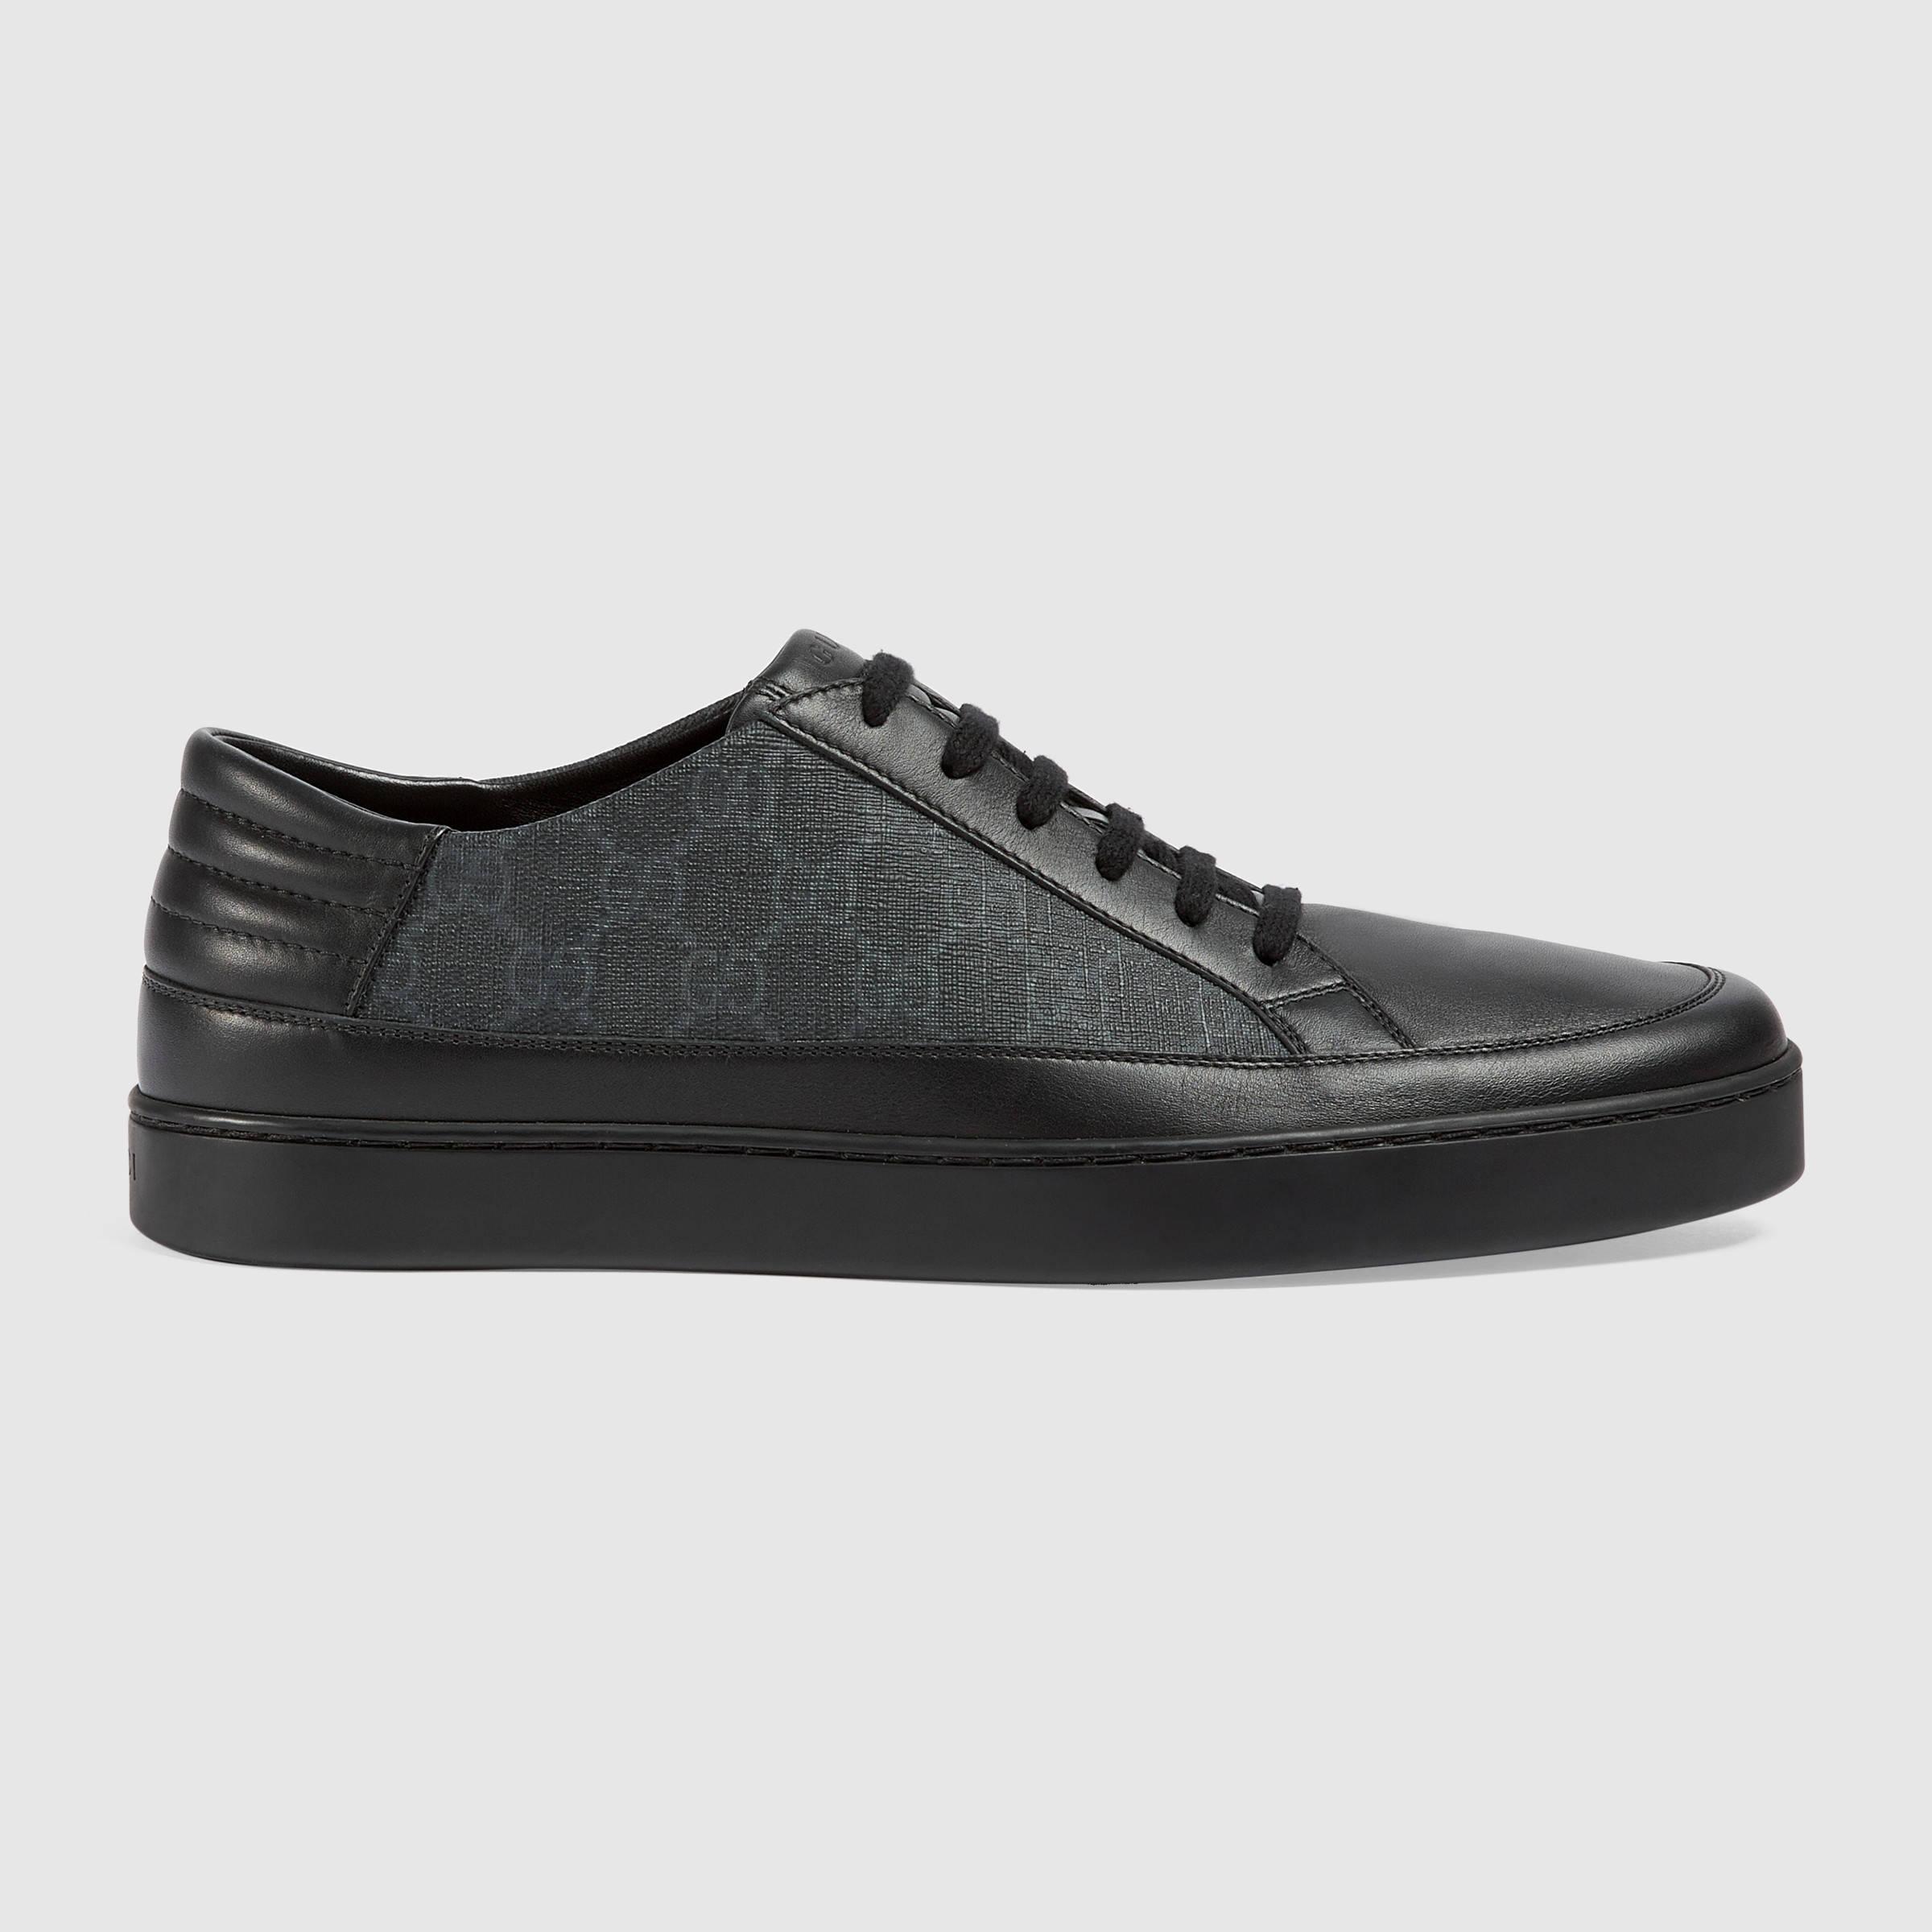 Lyst - Gucci Gg Supreme Low-top Trainer in Black for Men - Save 16%